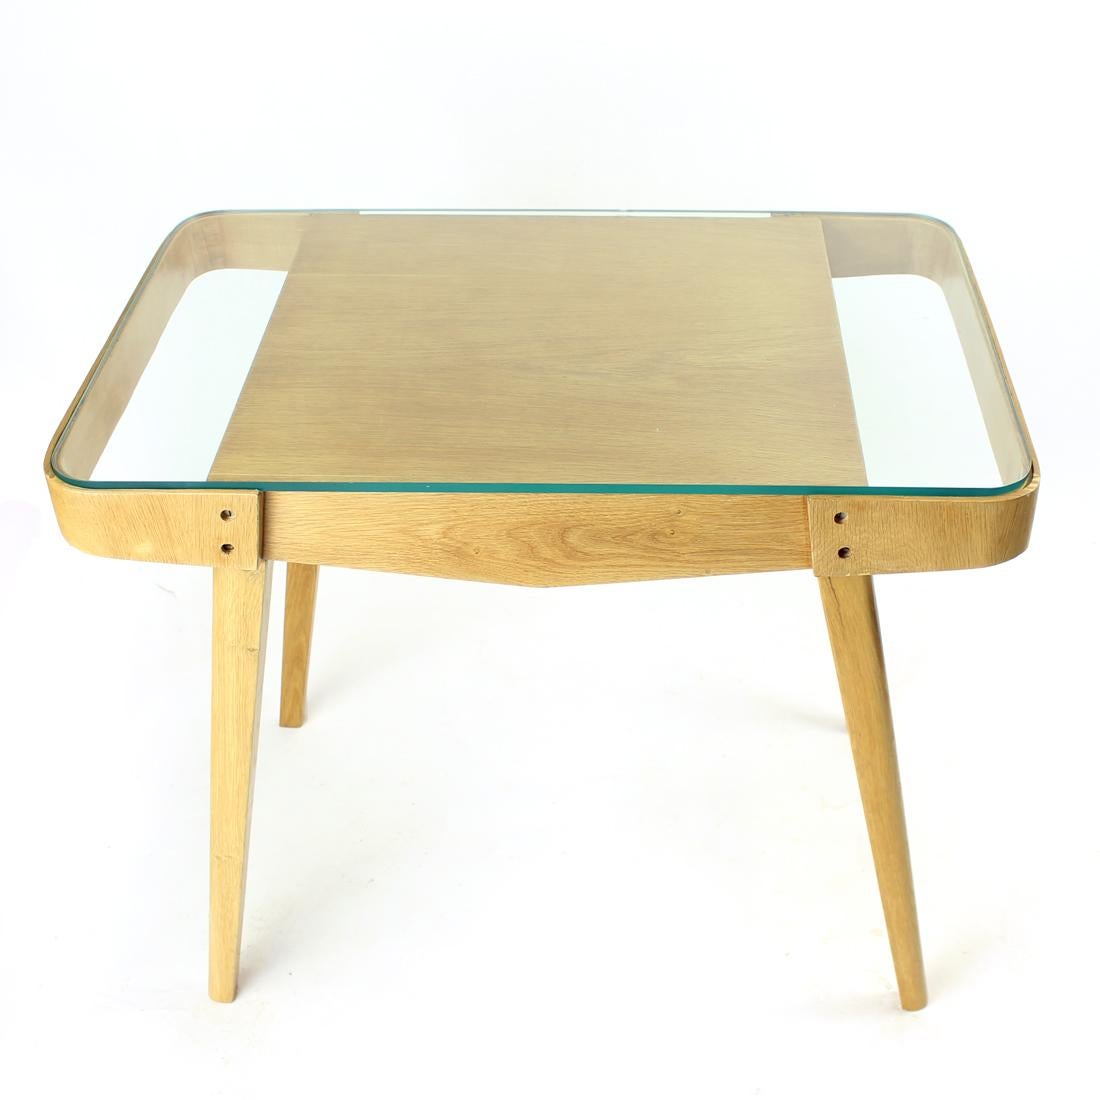 Midcentury Coffee Table in Oak and Glass, Czechoslovakia, 1960s For Sale 1